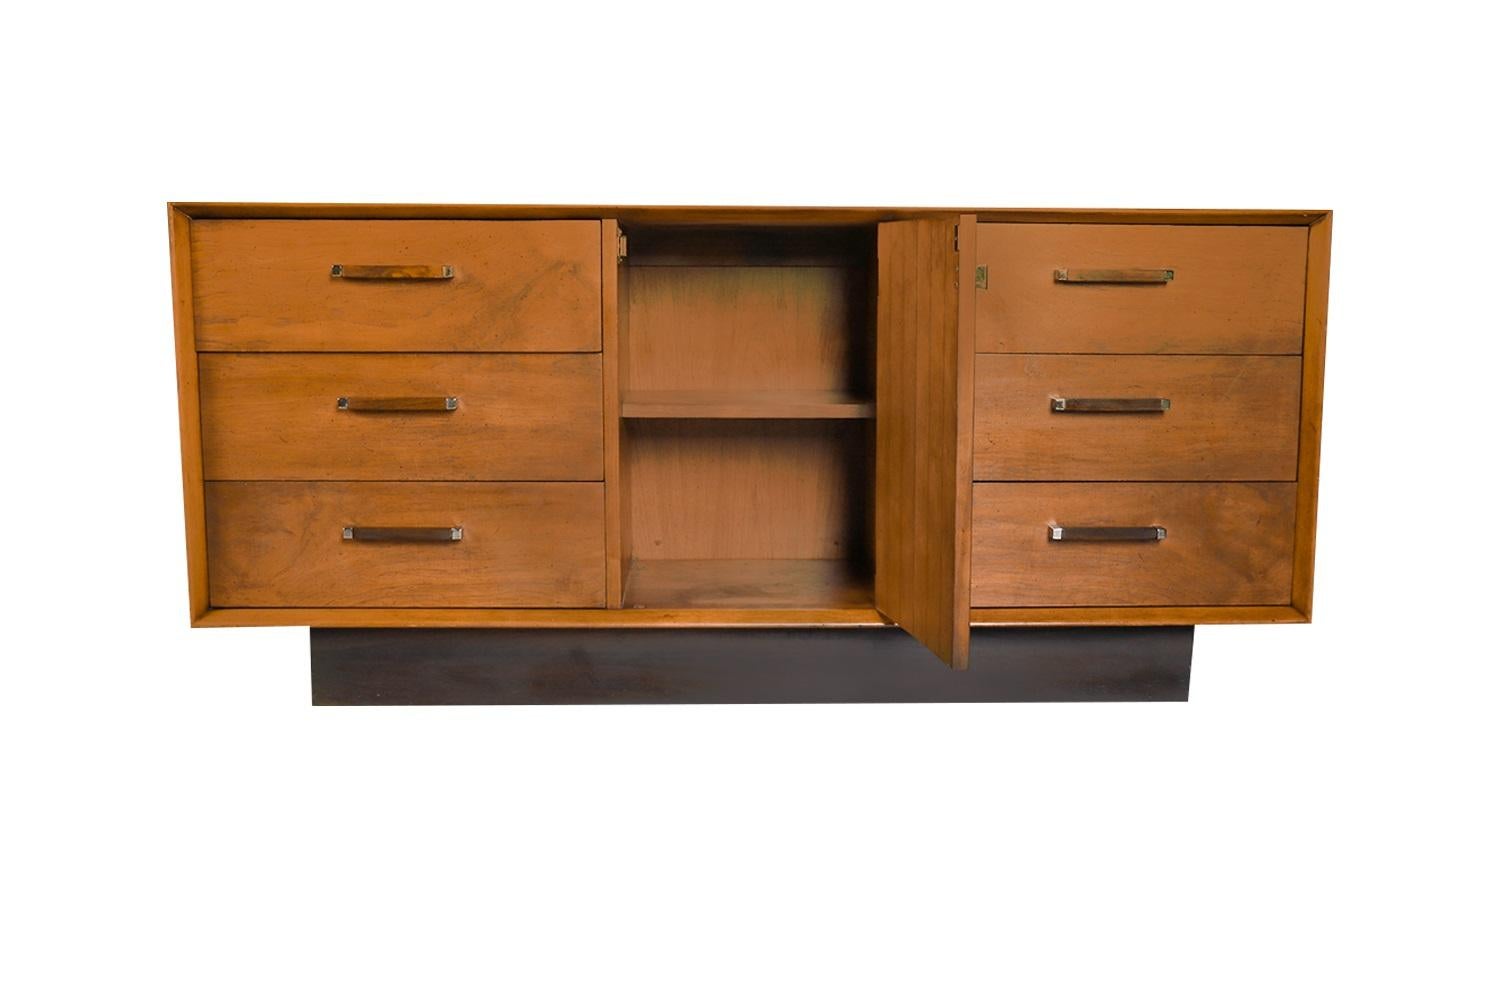 An elegant dresser from the Lane furniture “tower suite”. This is a beautiful example of Mid-Century craftsmanship by Lane Furniture. This retro piece was constructed with top of the line hardware, and excellently crafted woodwork. Features solid